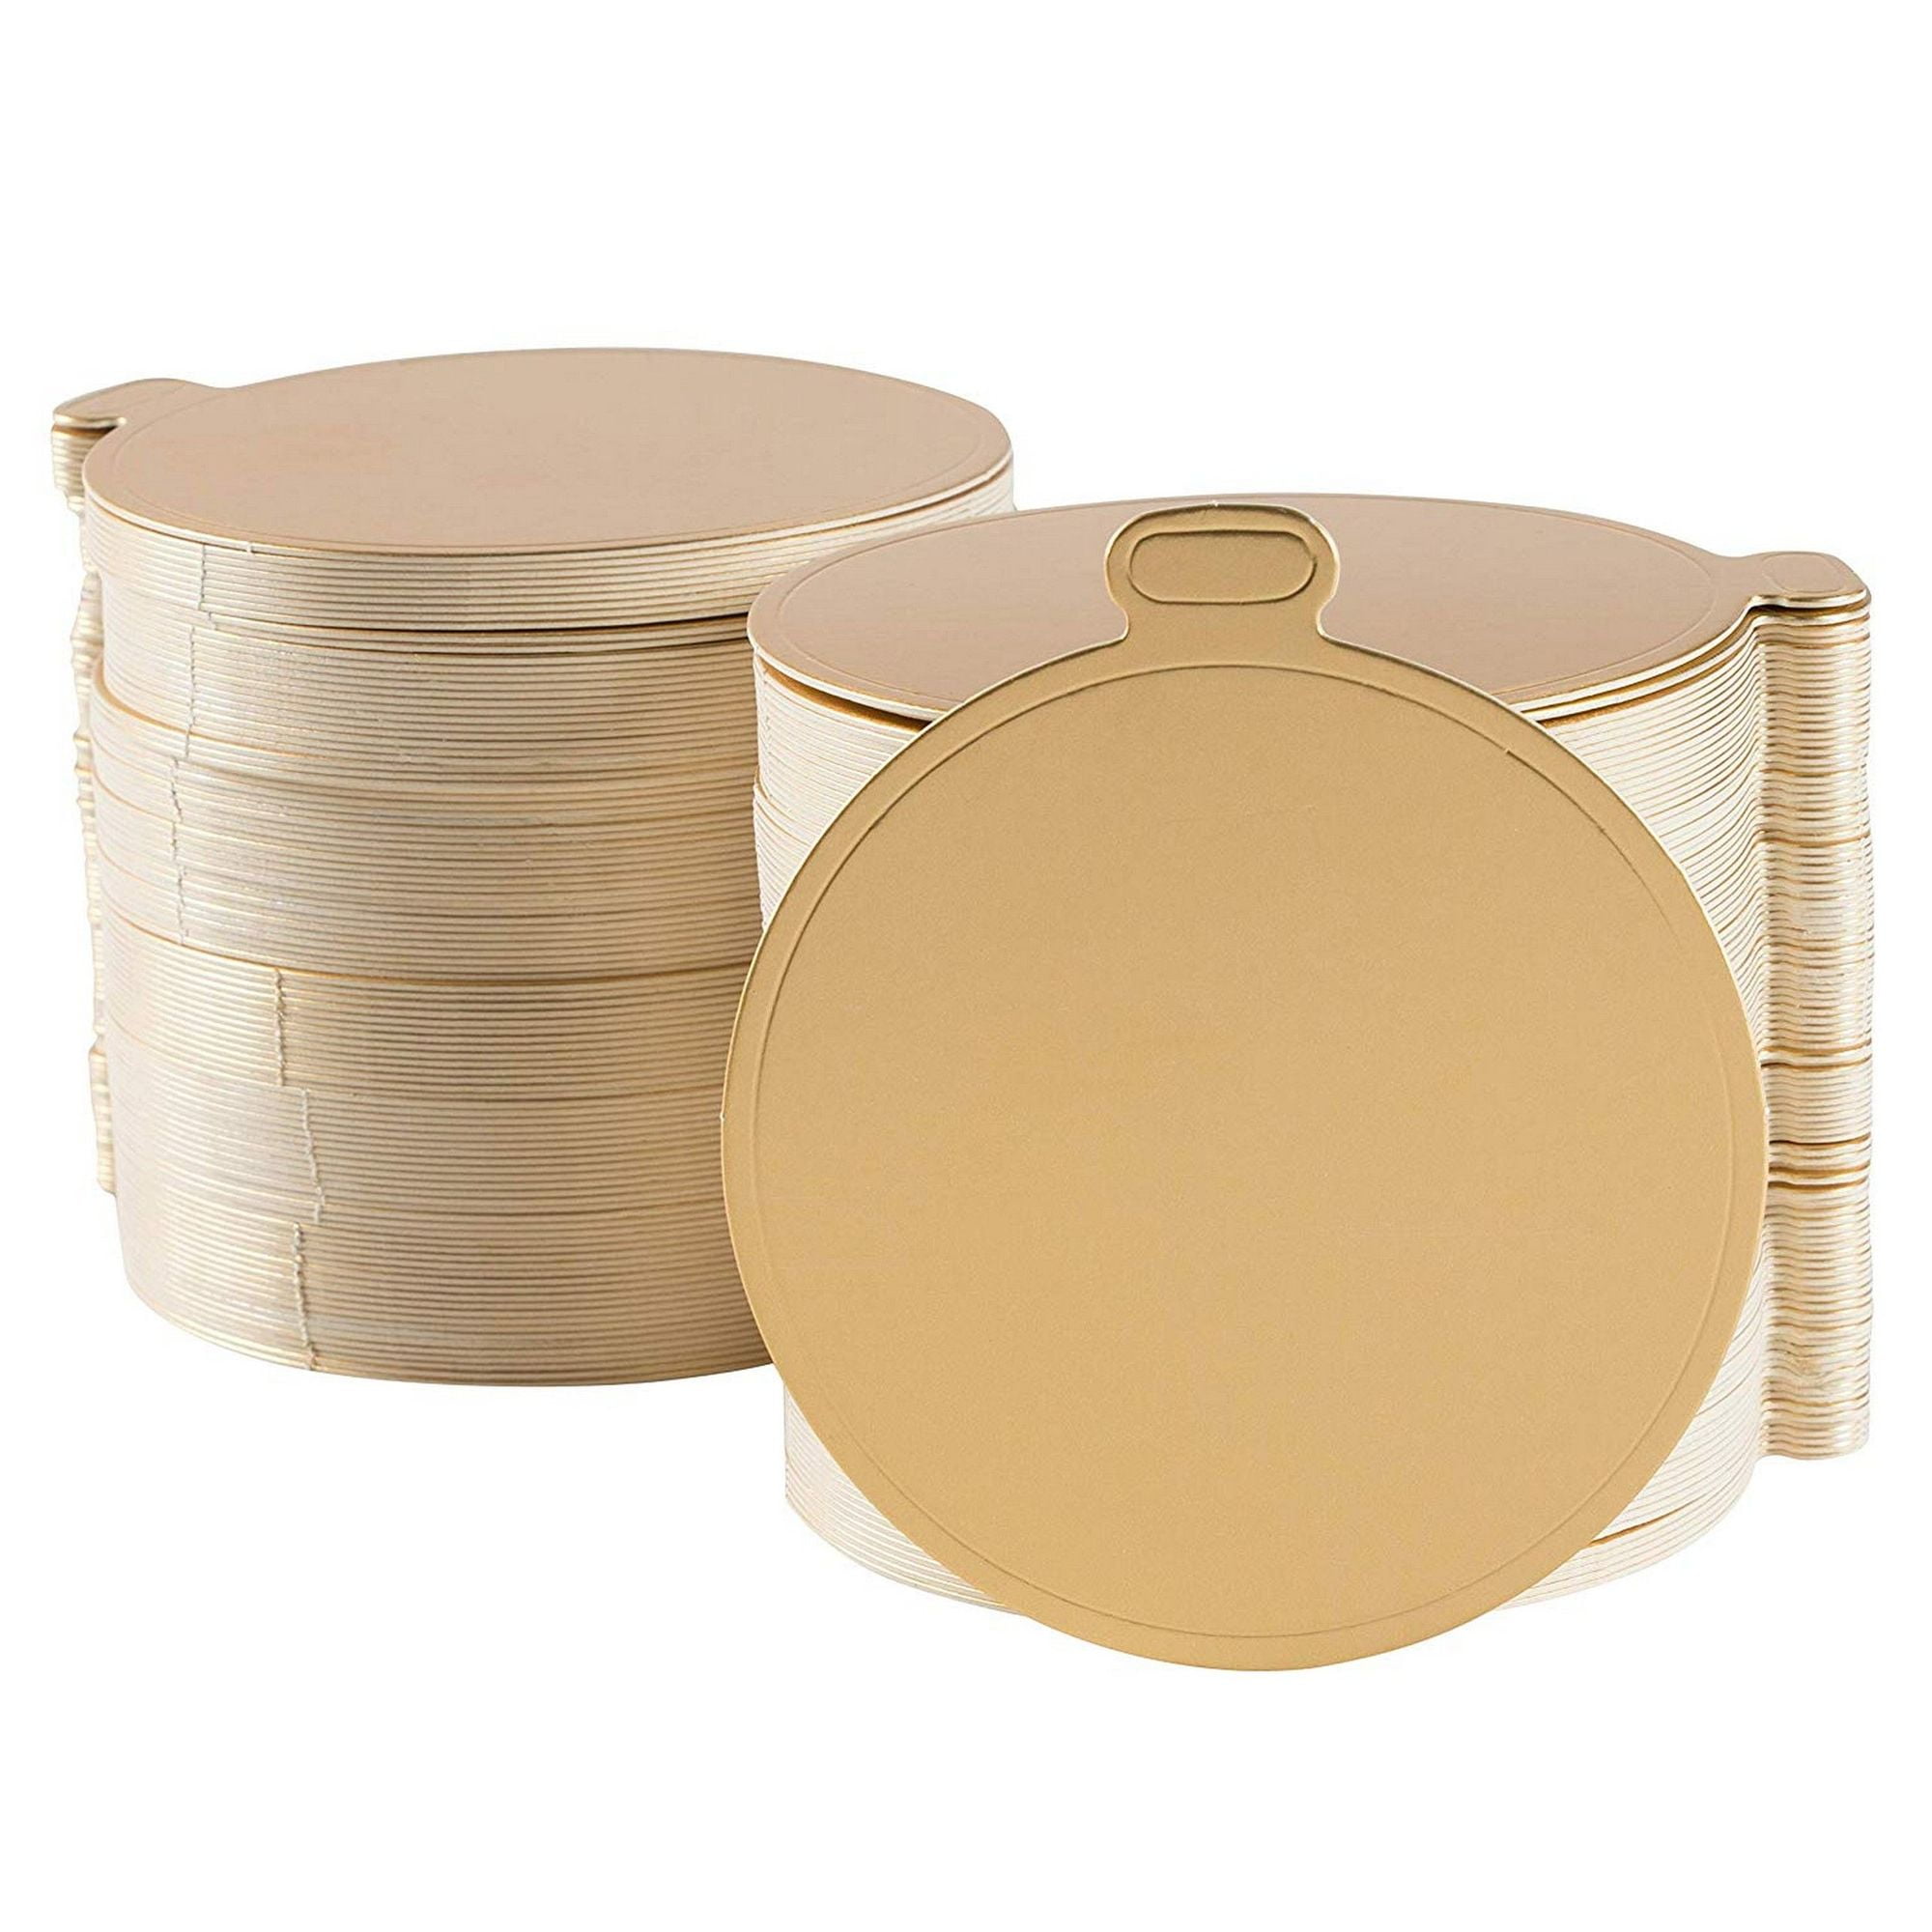 Mini Cake Boards with Tabs 200Pack Metallic Gold 3.5Inch Round Base for Single Serve Sweets